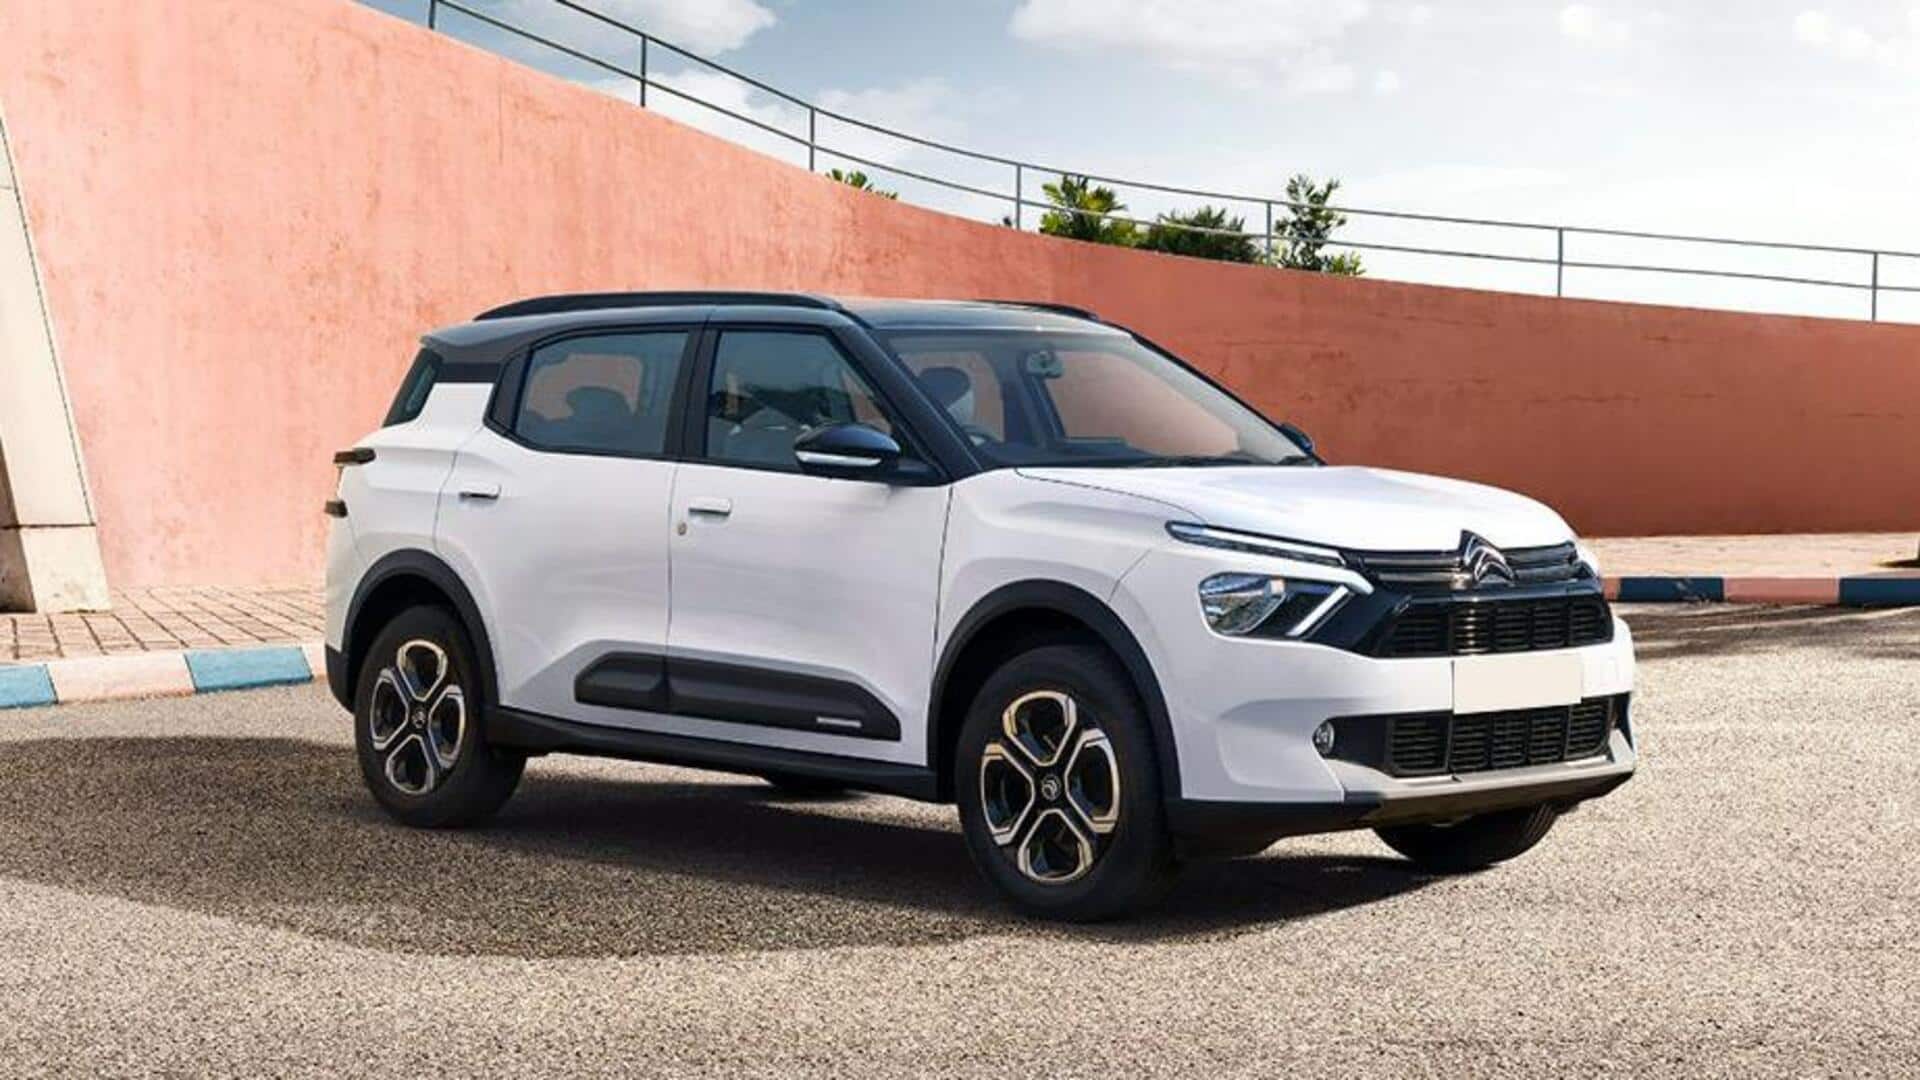 Variant-wise prices of Citroen C3 Aircross SUV now out